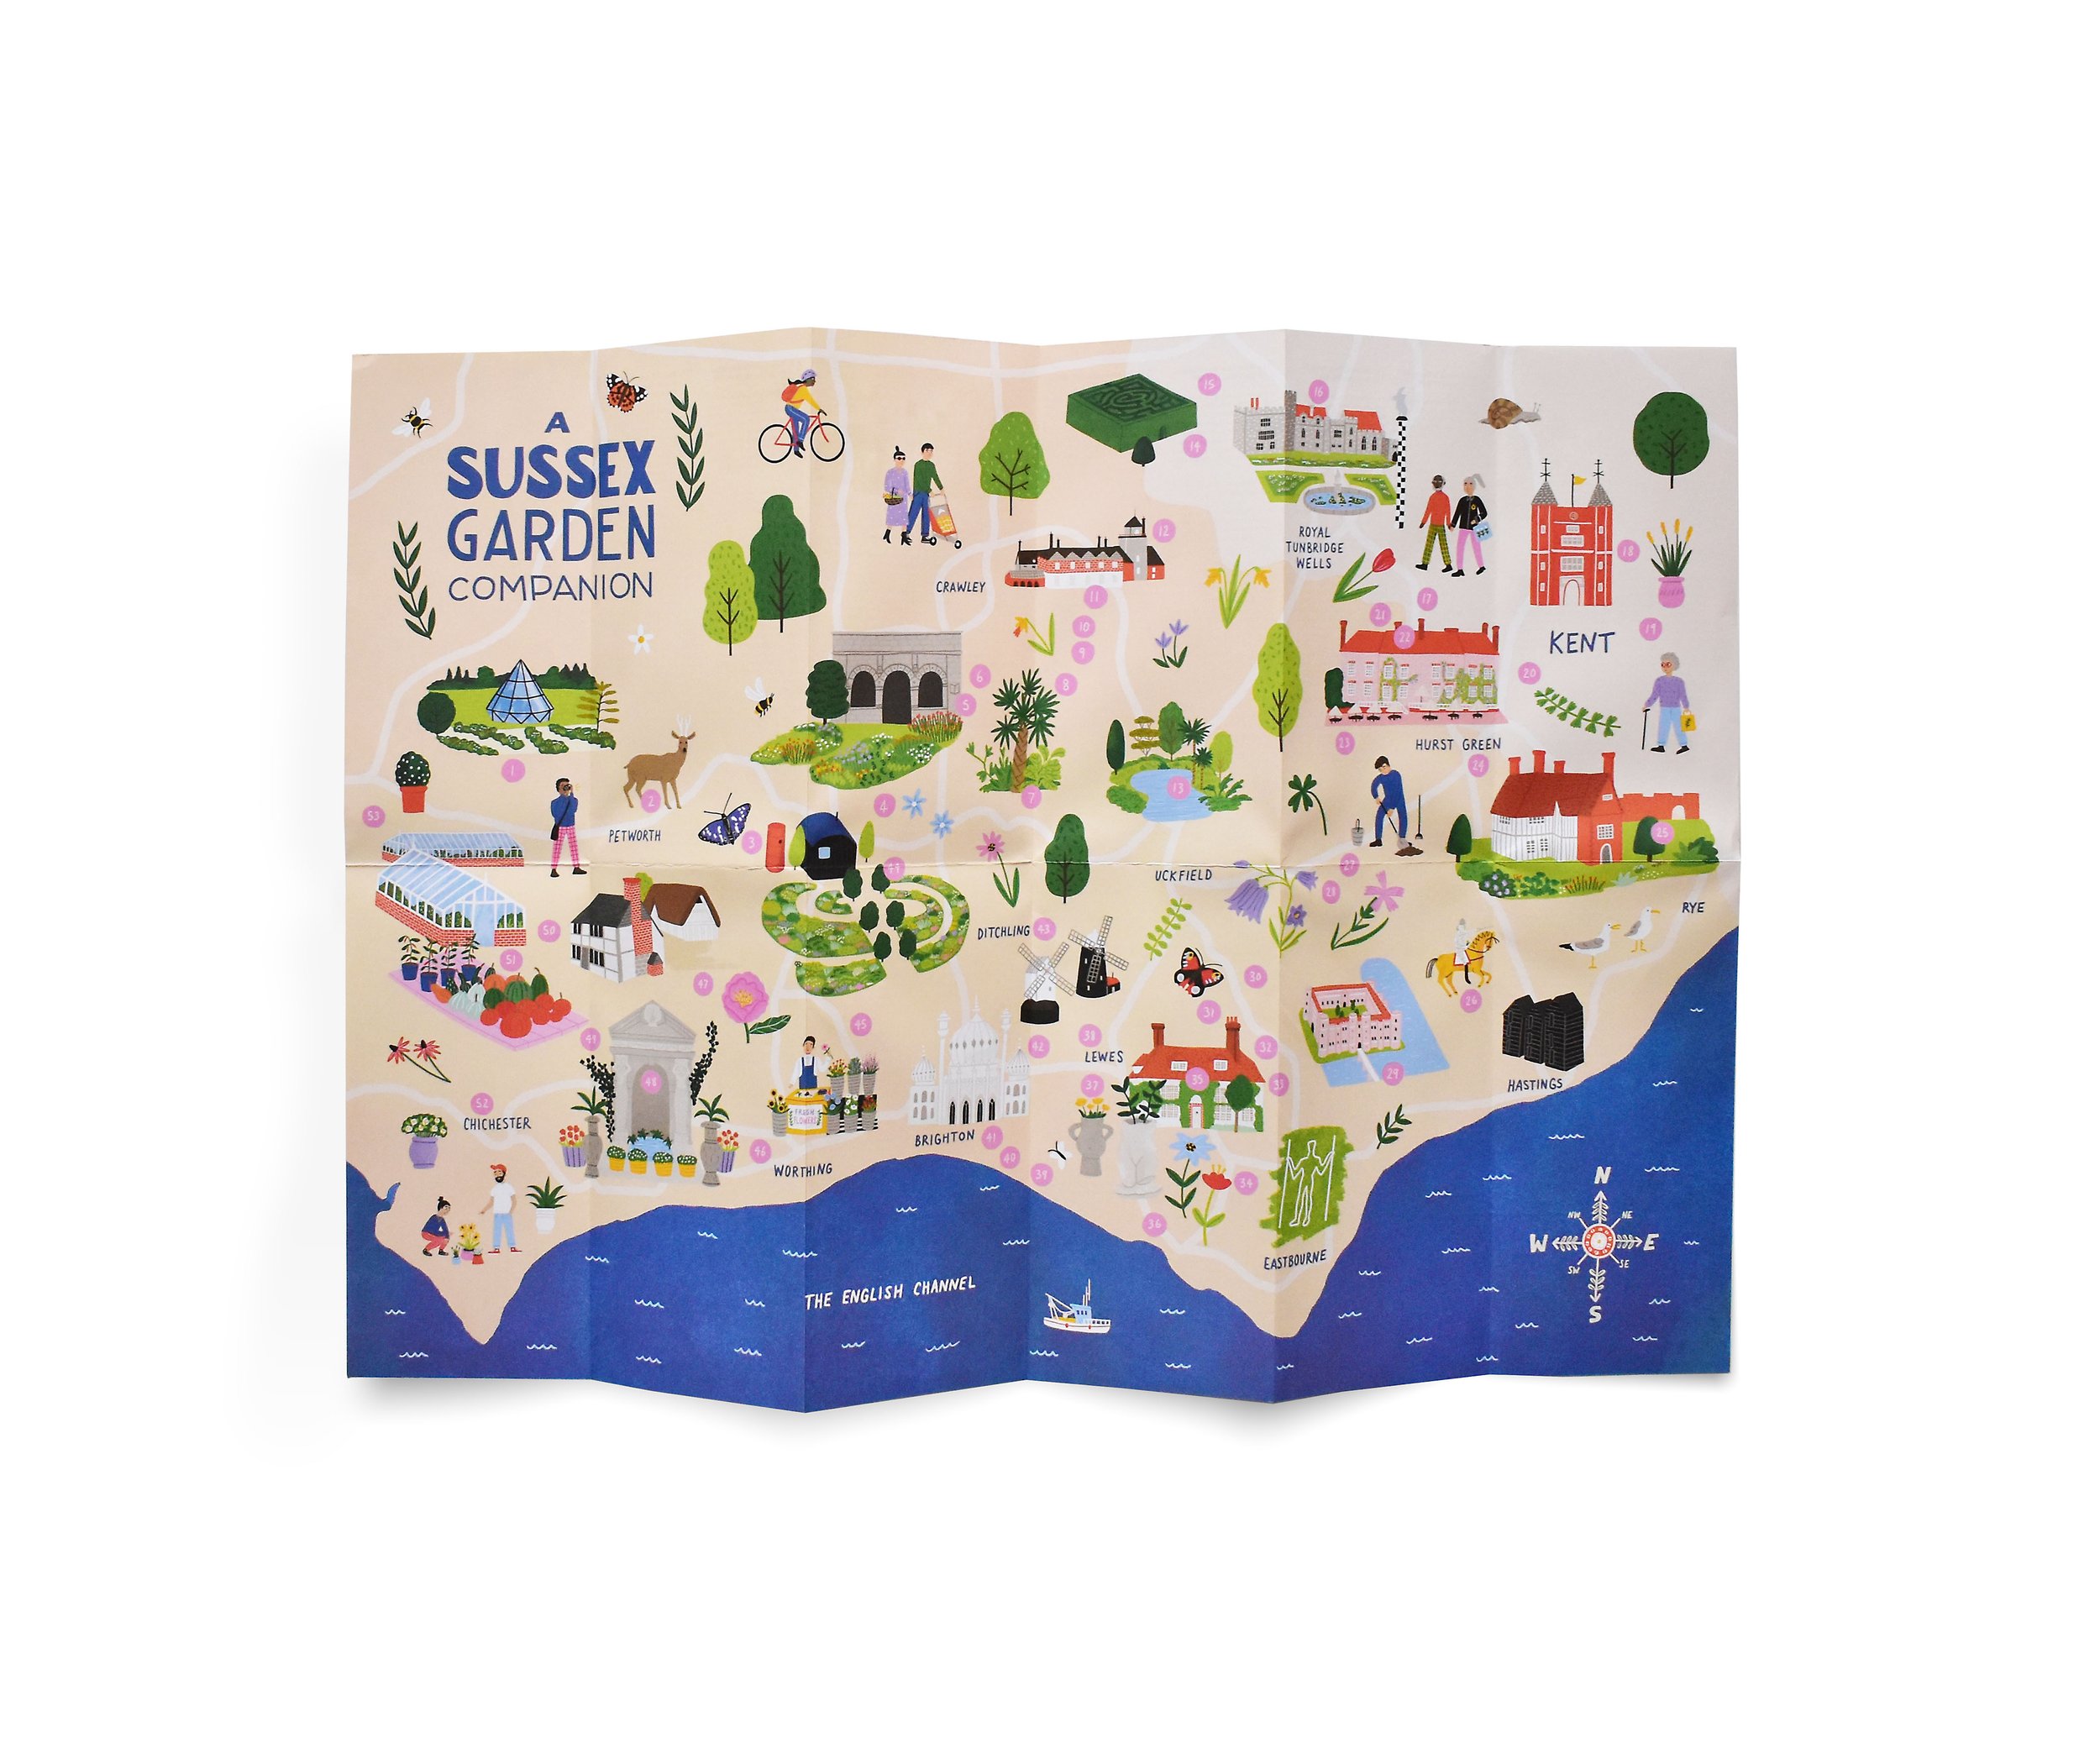 A Sussex Garden Companion - a map and guide to the best gardens to visit in Sussex